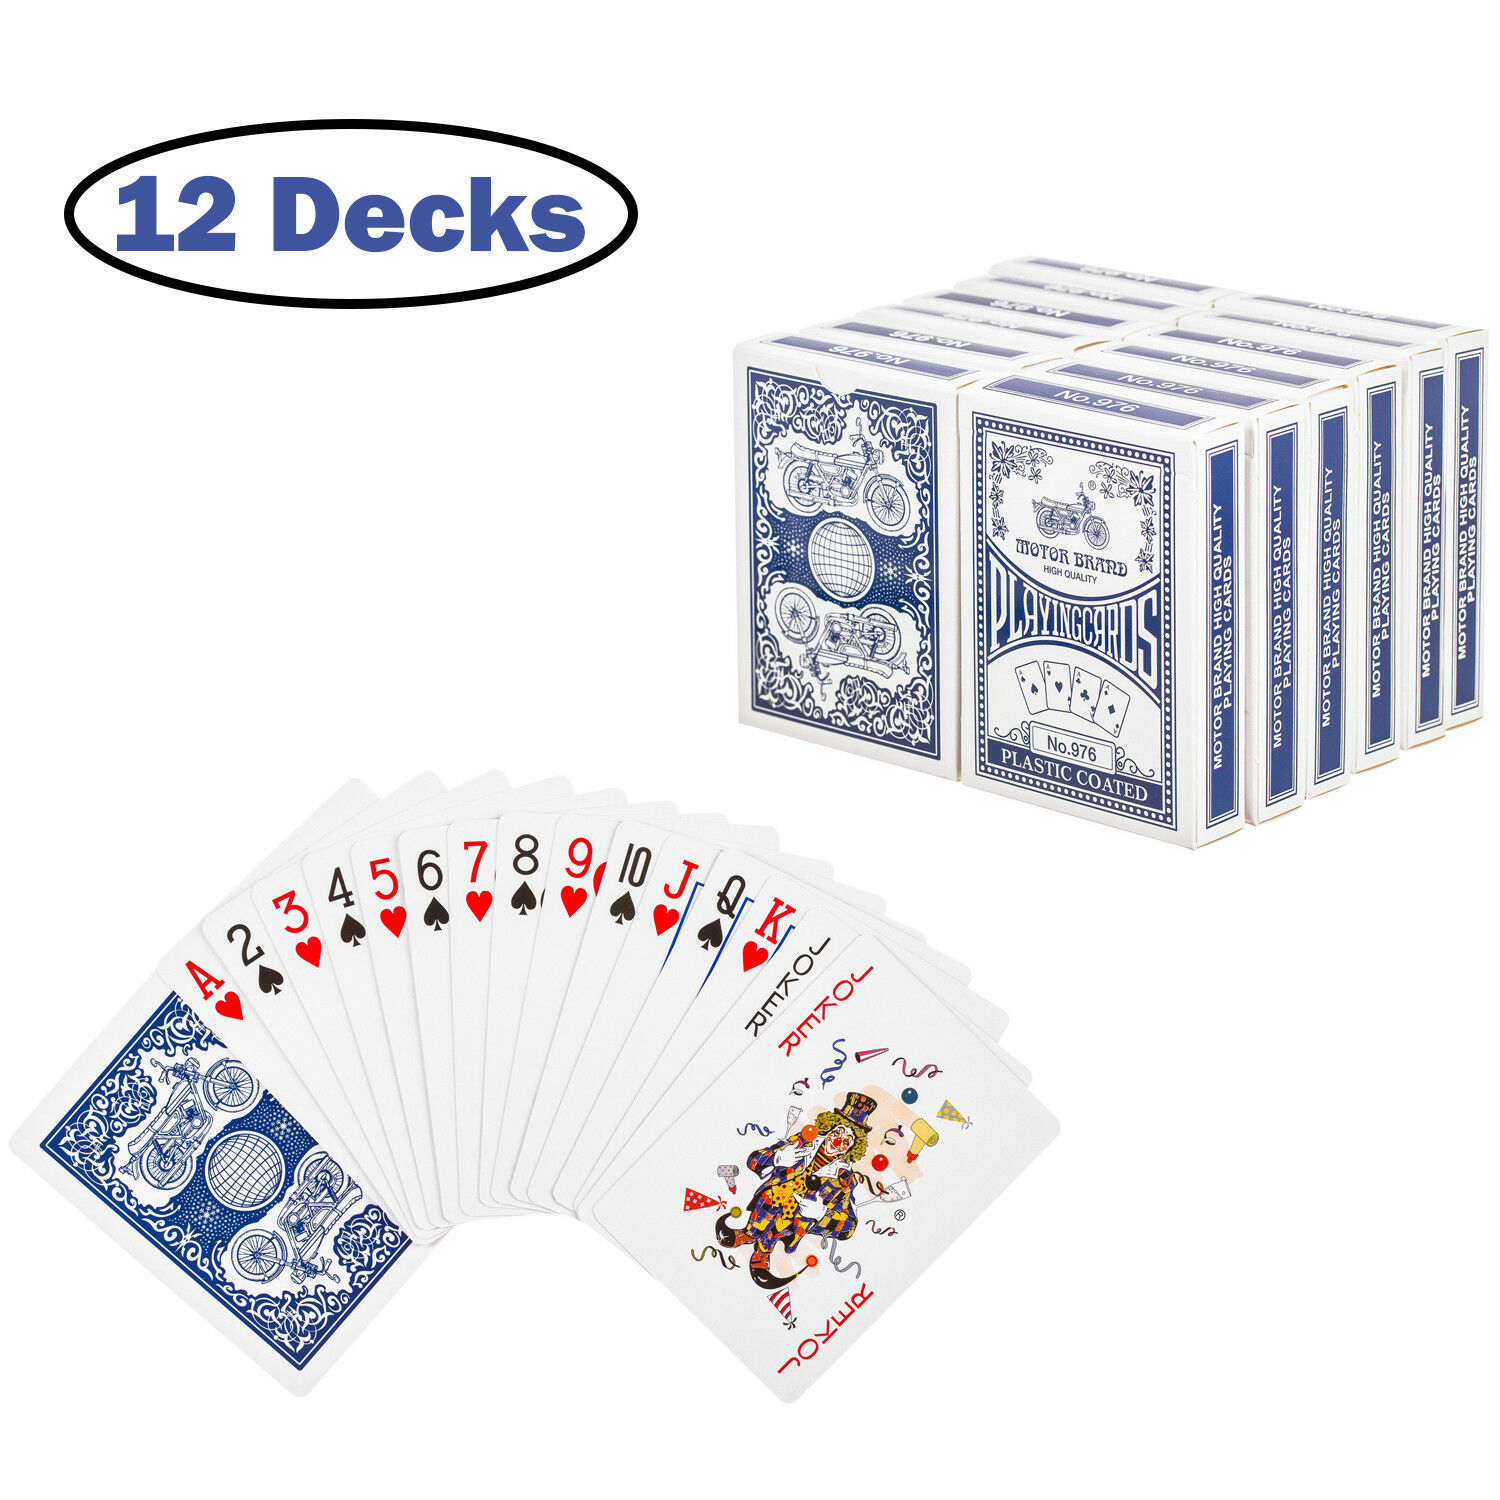 Otron Playing Cards, Poker Size Standard Index, 12 Decks Of Cards, Casino Grade.